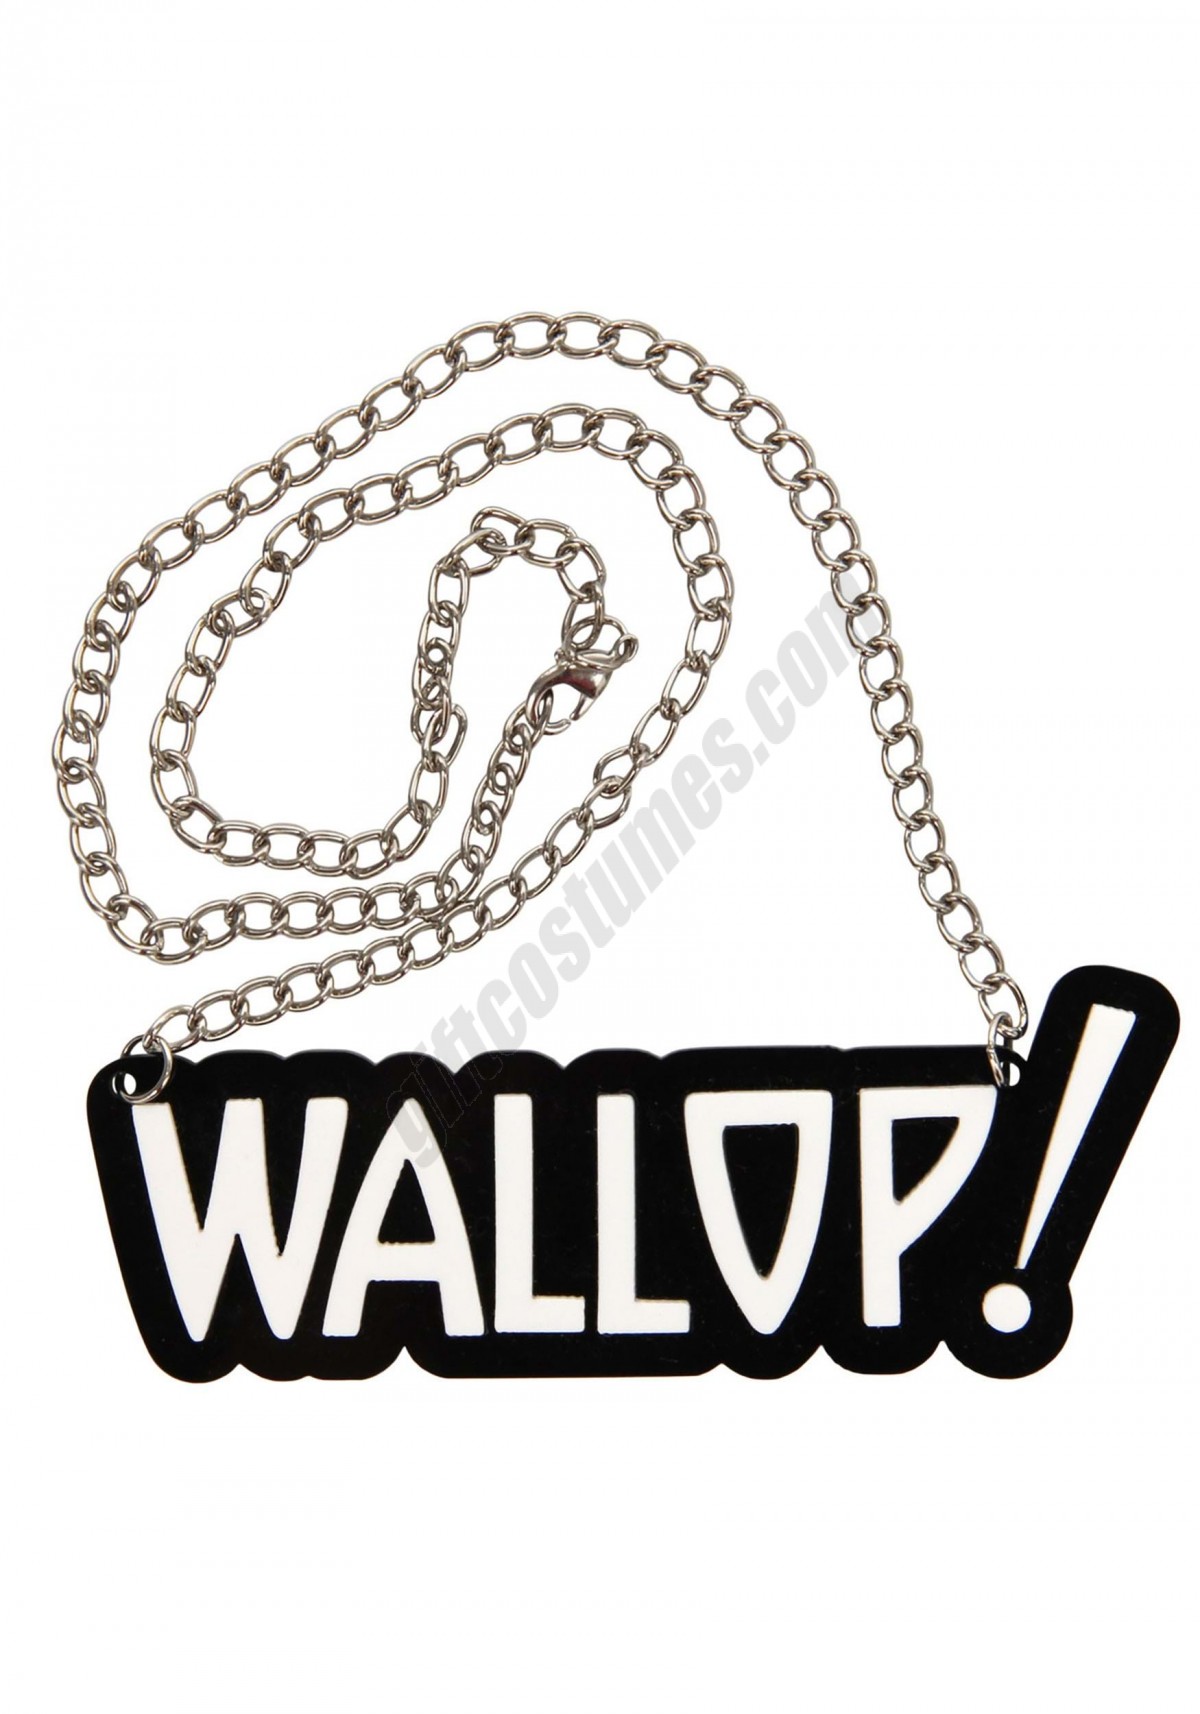 Wallop! Cup Head Necklace Promotions - -0